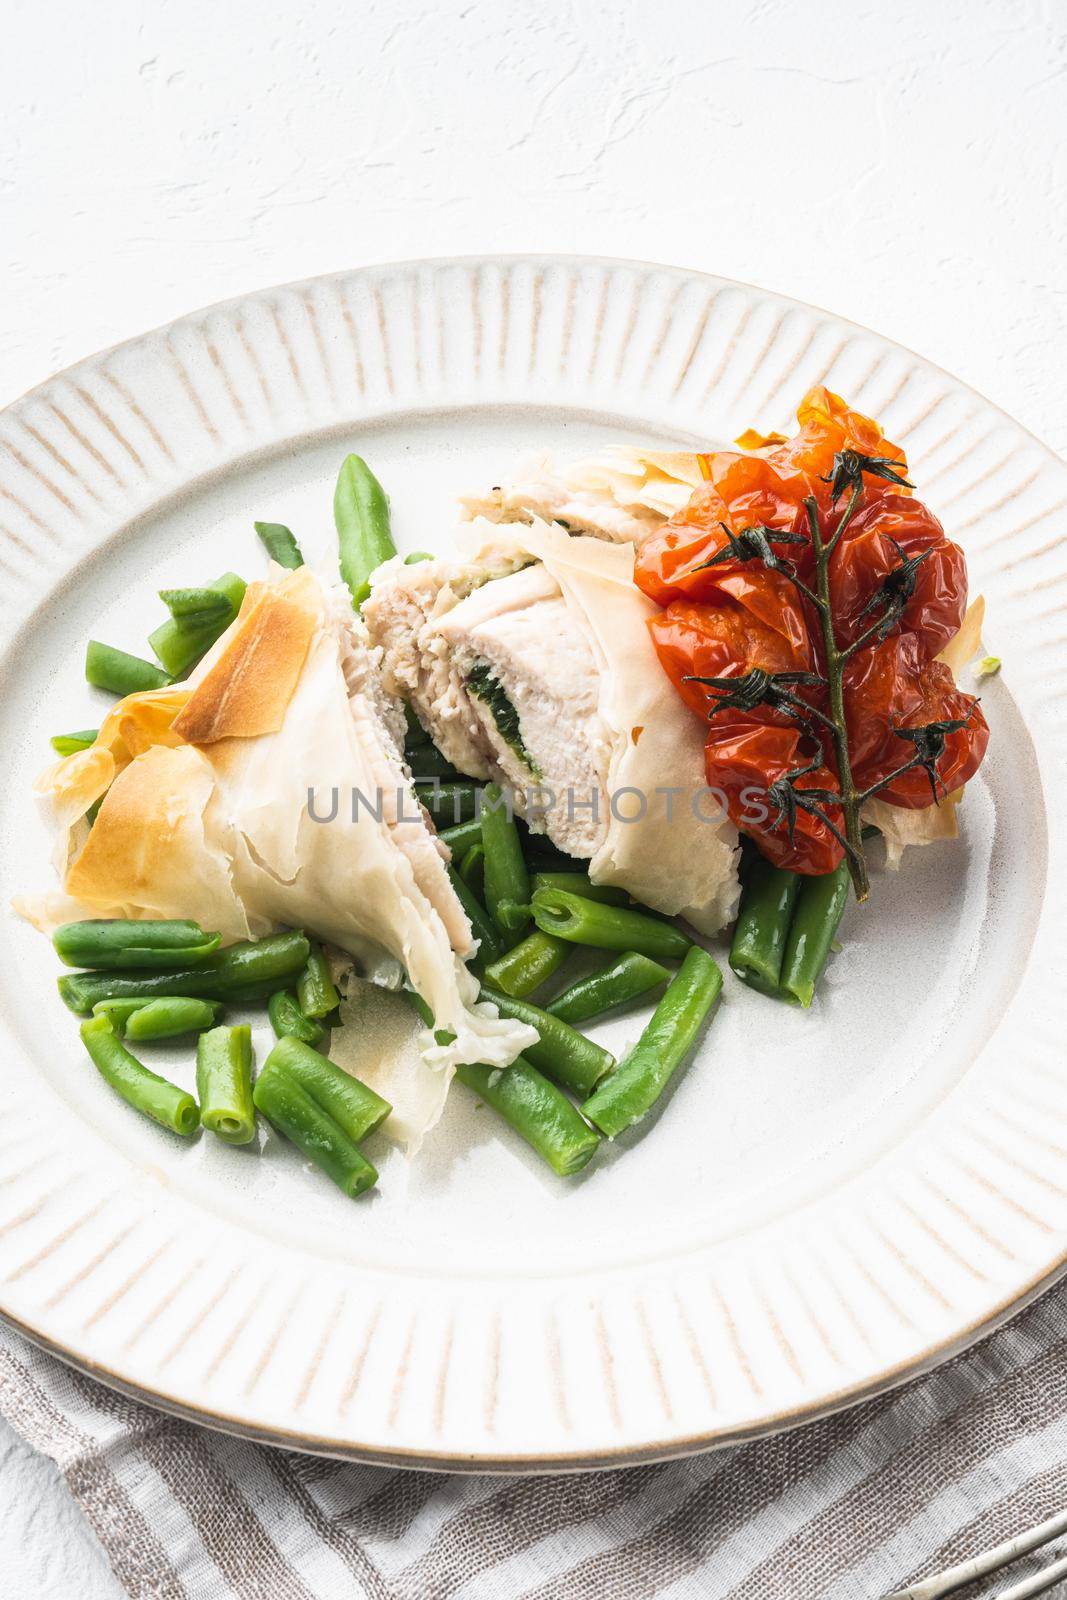 Freshly cooked Chicken Kiev oozing garlic and parsley butter, with baked cherry tomatoes And green beans, on white stone background by Ilianesolenyi